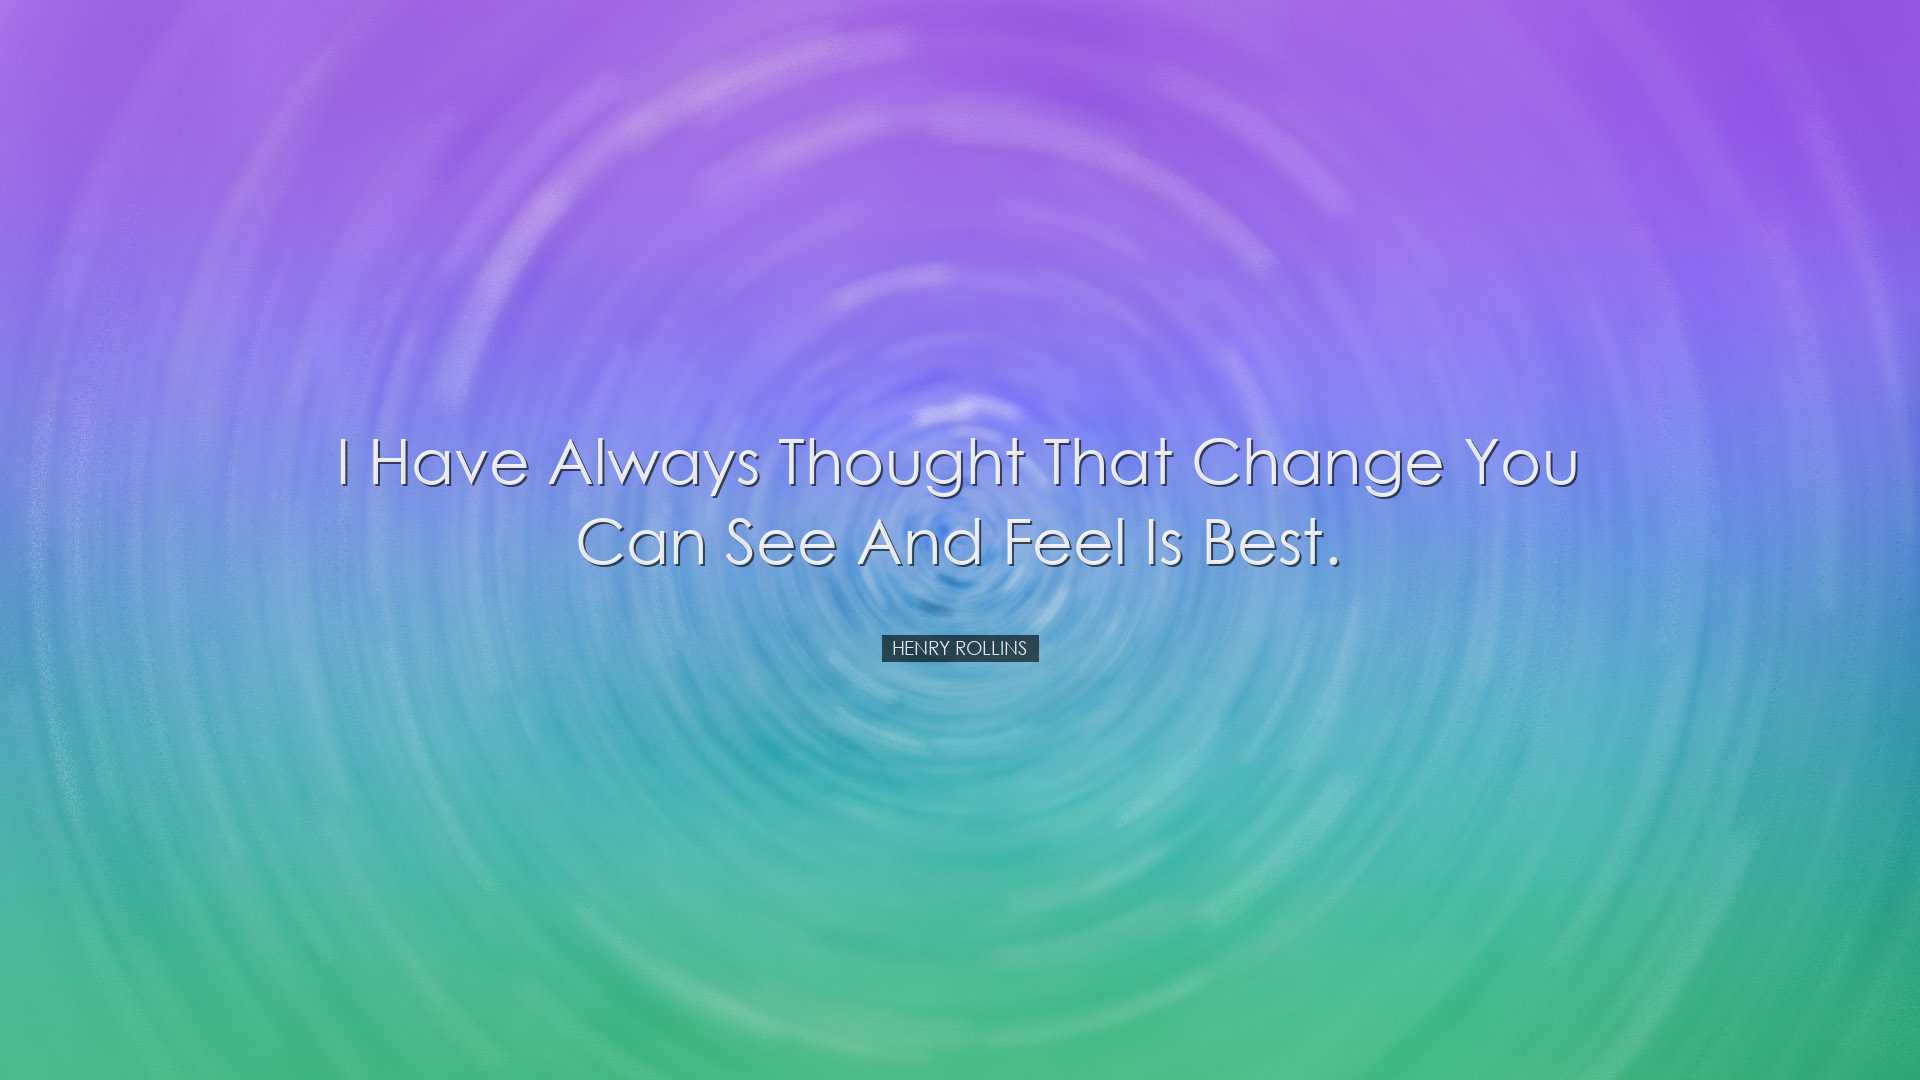 I have always thought that change you can see and feel is best. -